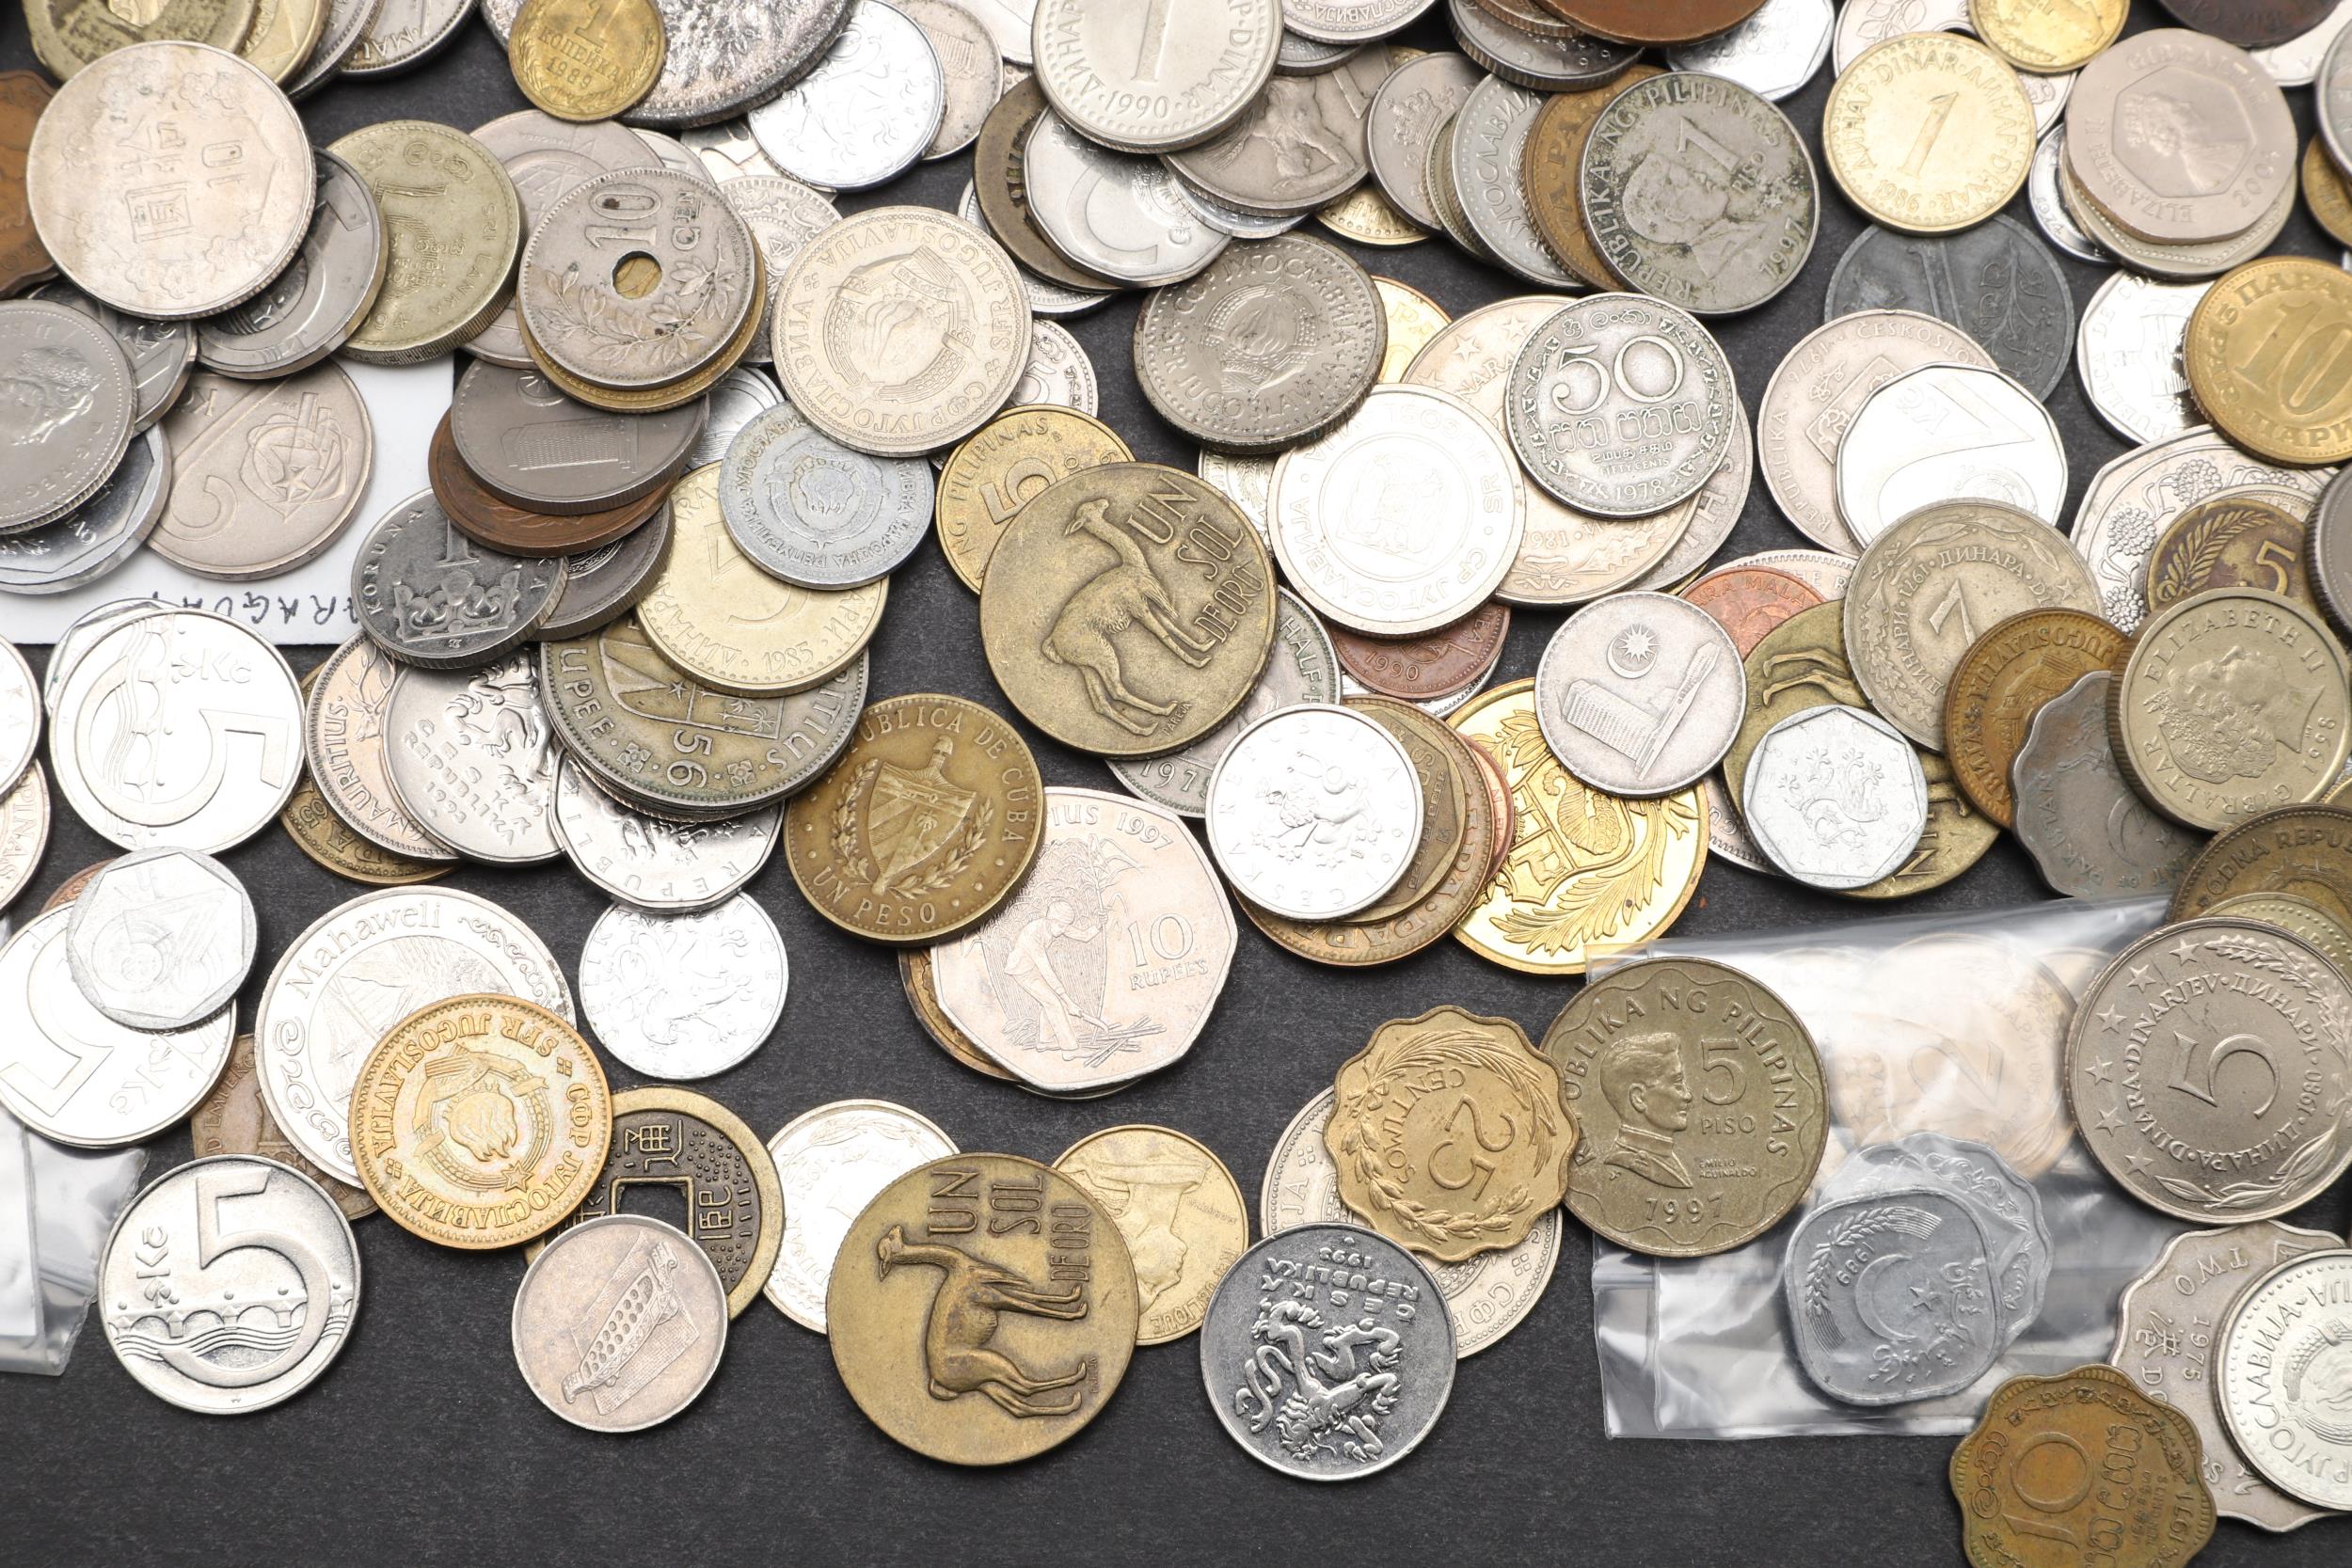 A COLLECTION OF WORLD COINS, VARIOUS COUNTIRES TO INCLUDE MALAYA, CHINA, GIBRALTAR AND MANY OTHERS. - Image 9 of 10